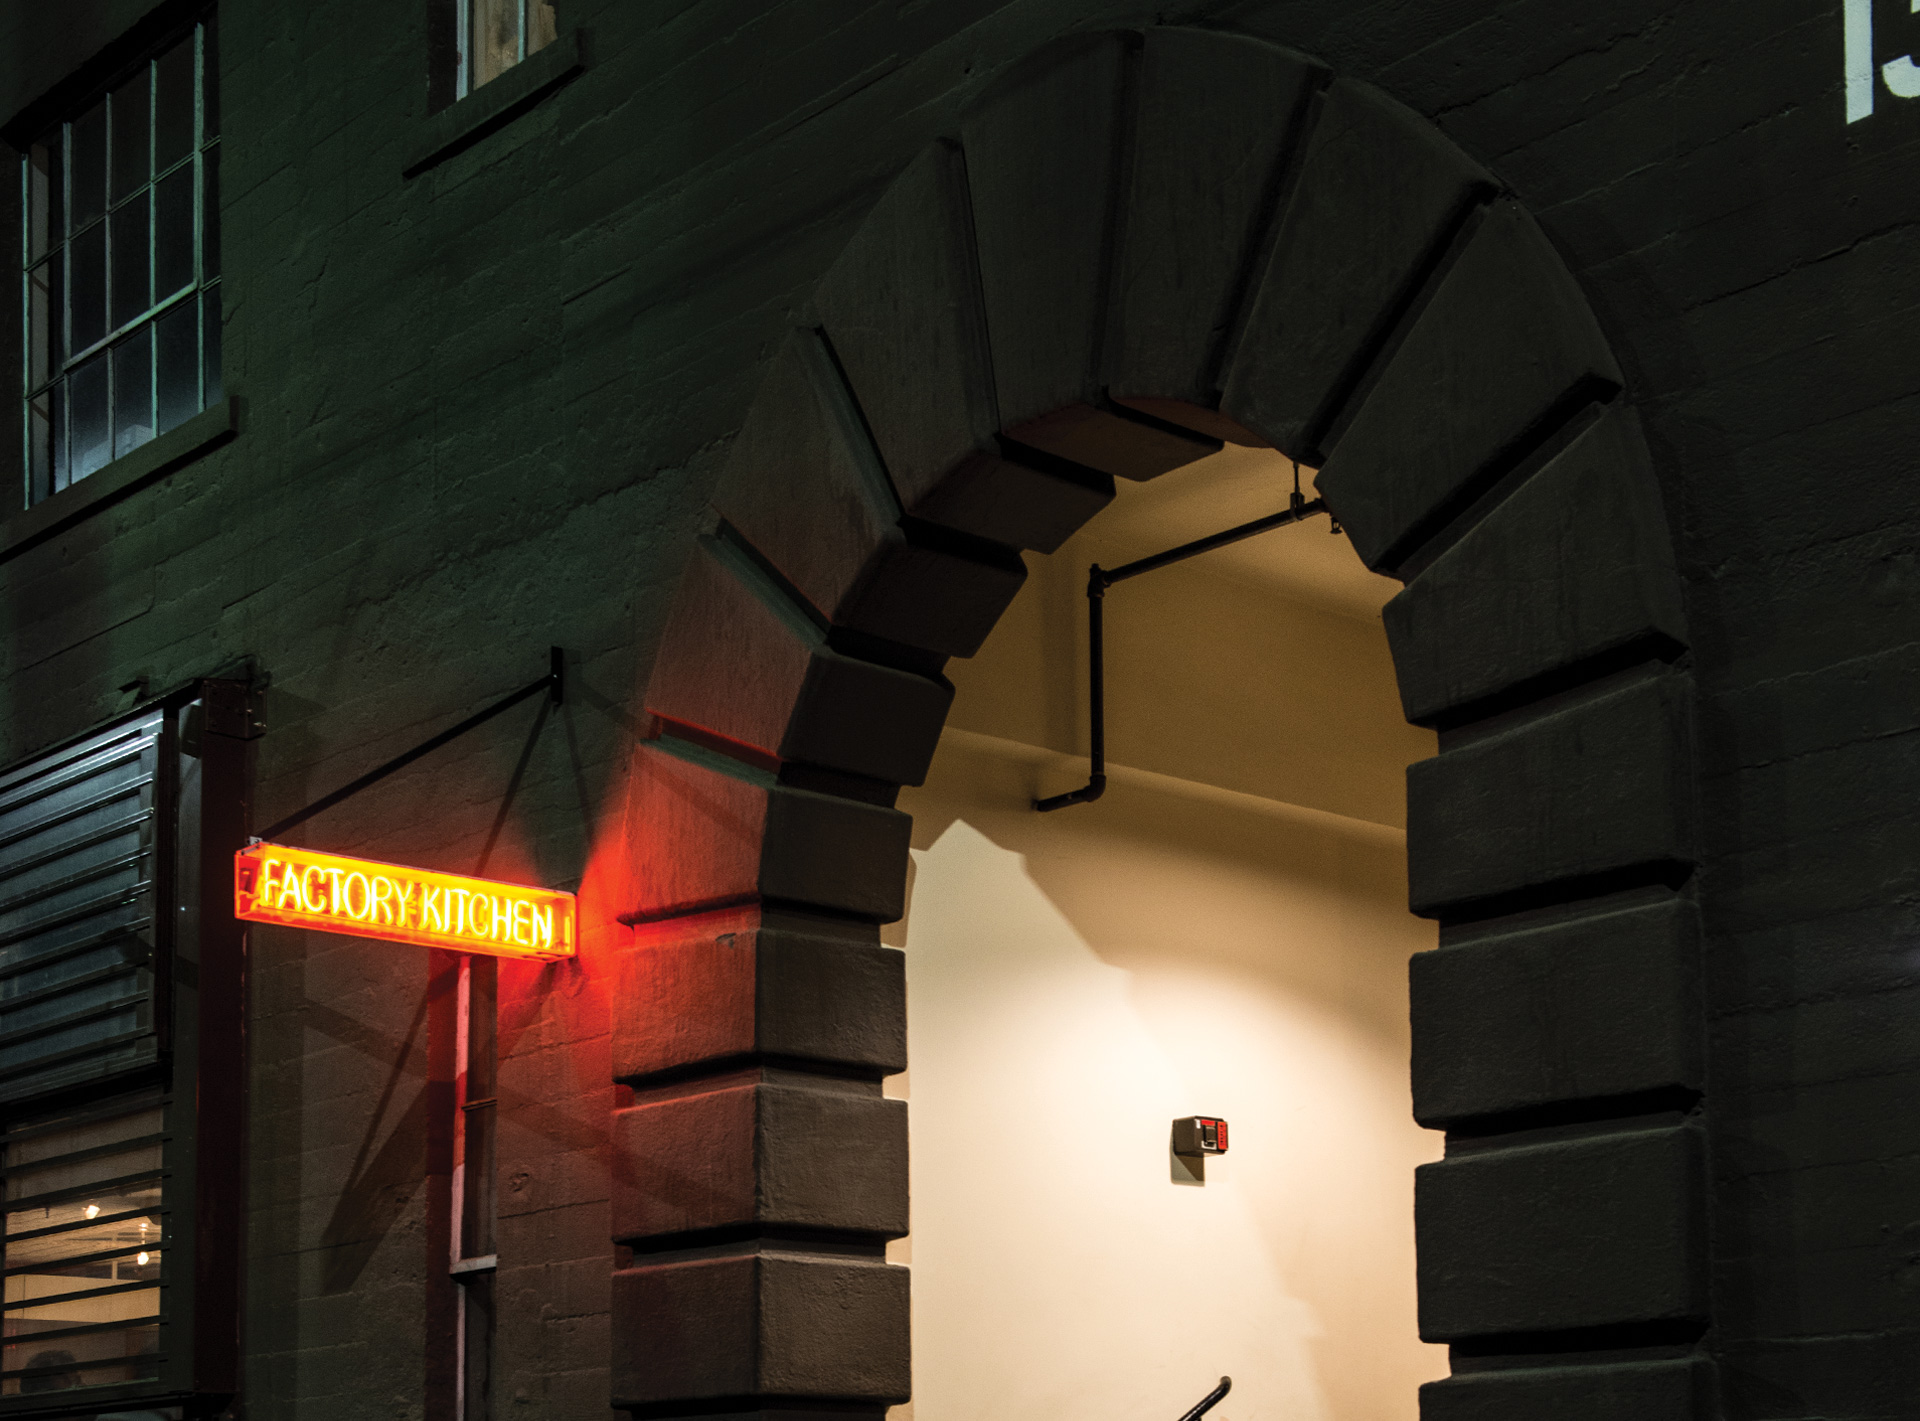 Outdoor night time picture of The Factory Kitchen entrance with Factory Kitchen sign lit up in red